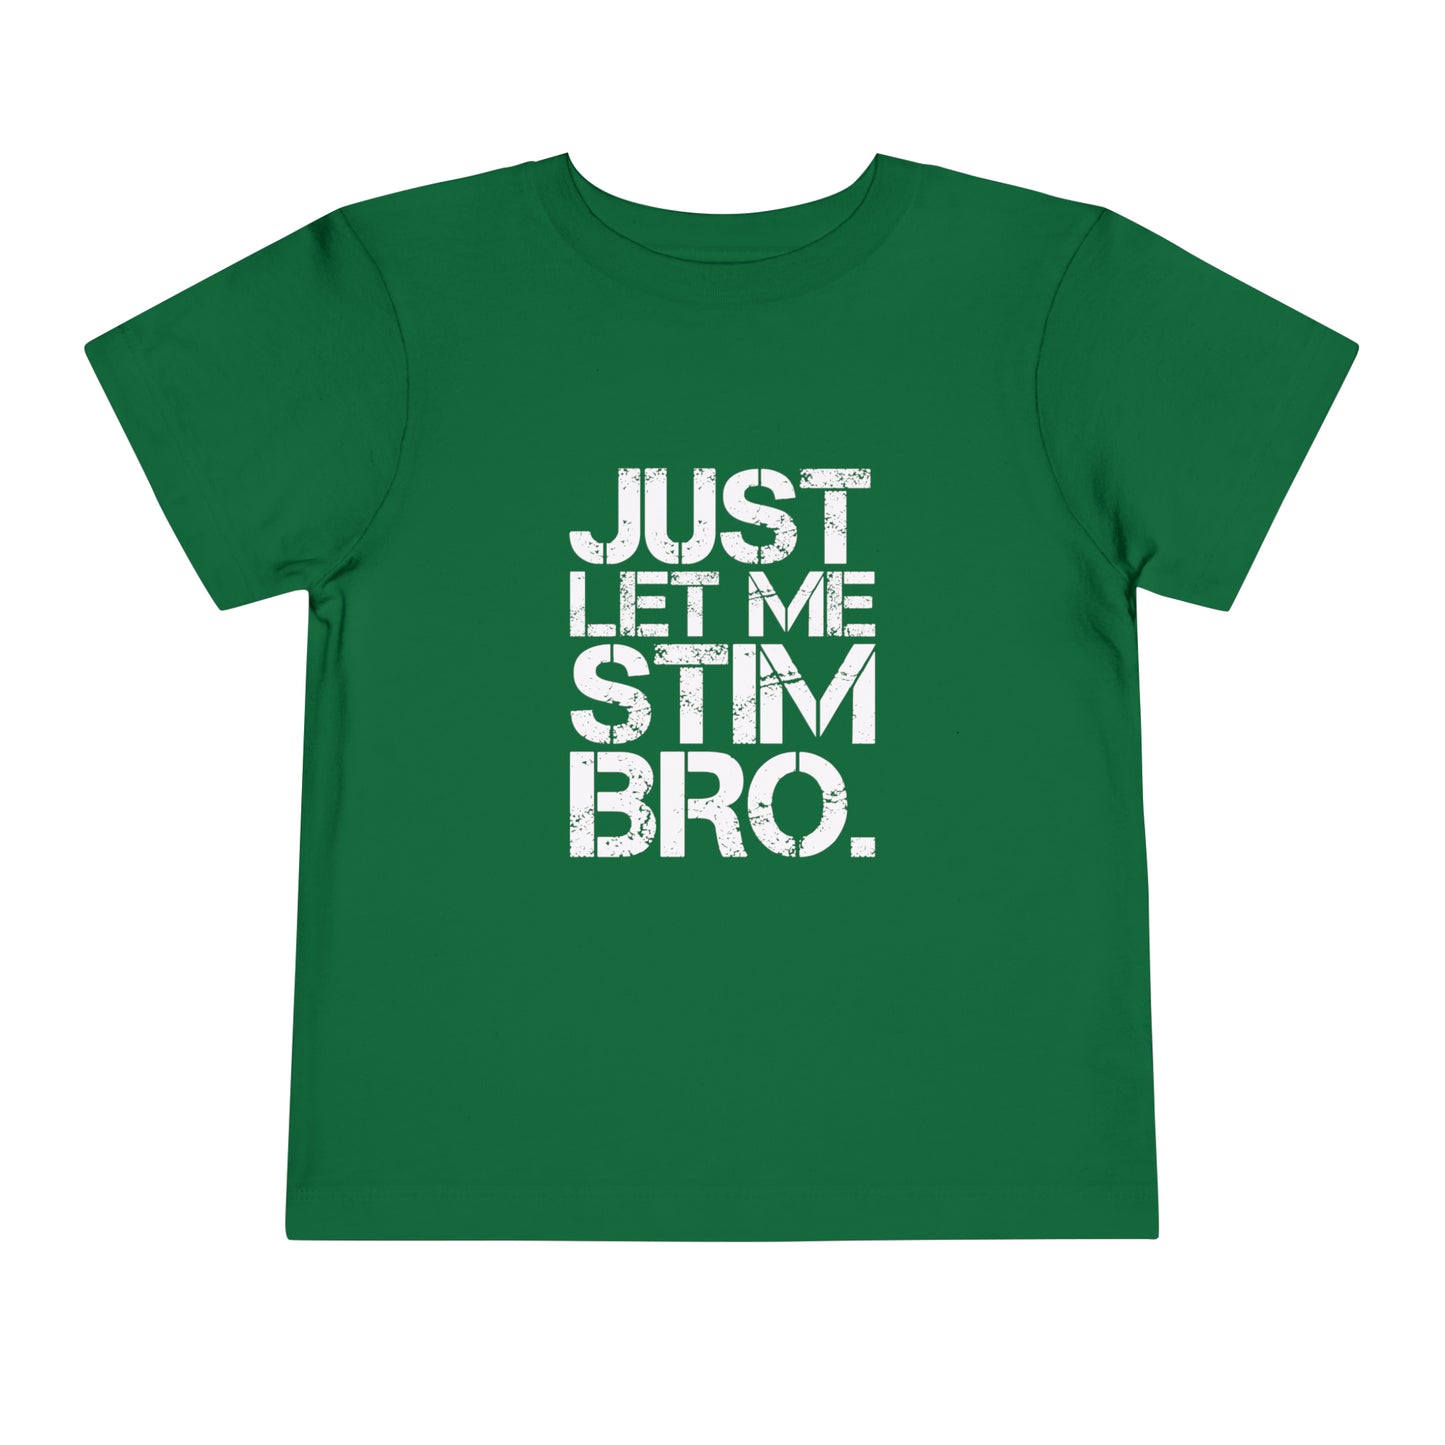 Just Let Me Stim Bro White letters Autism Awareness Advocate Toddler Short Sleeve Tee